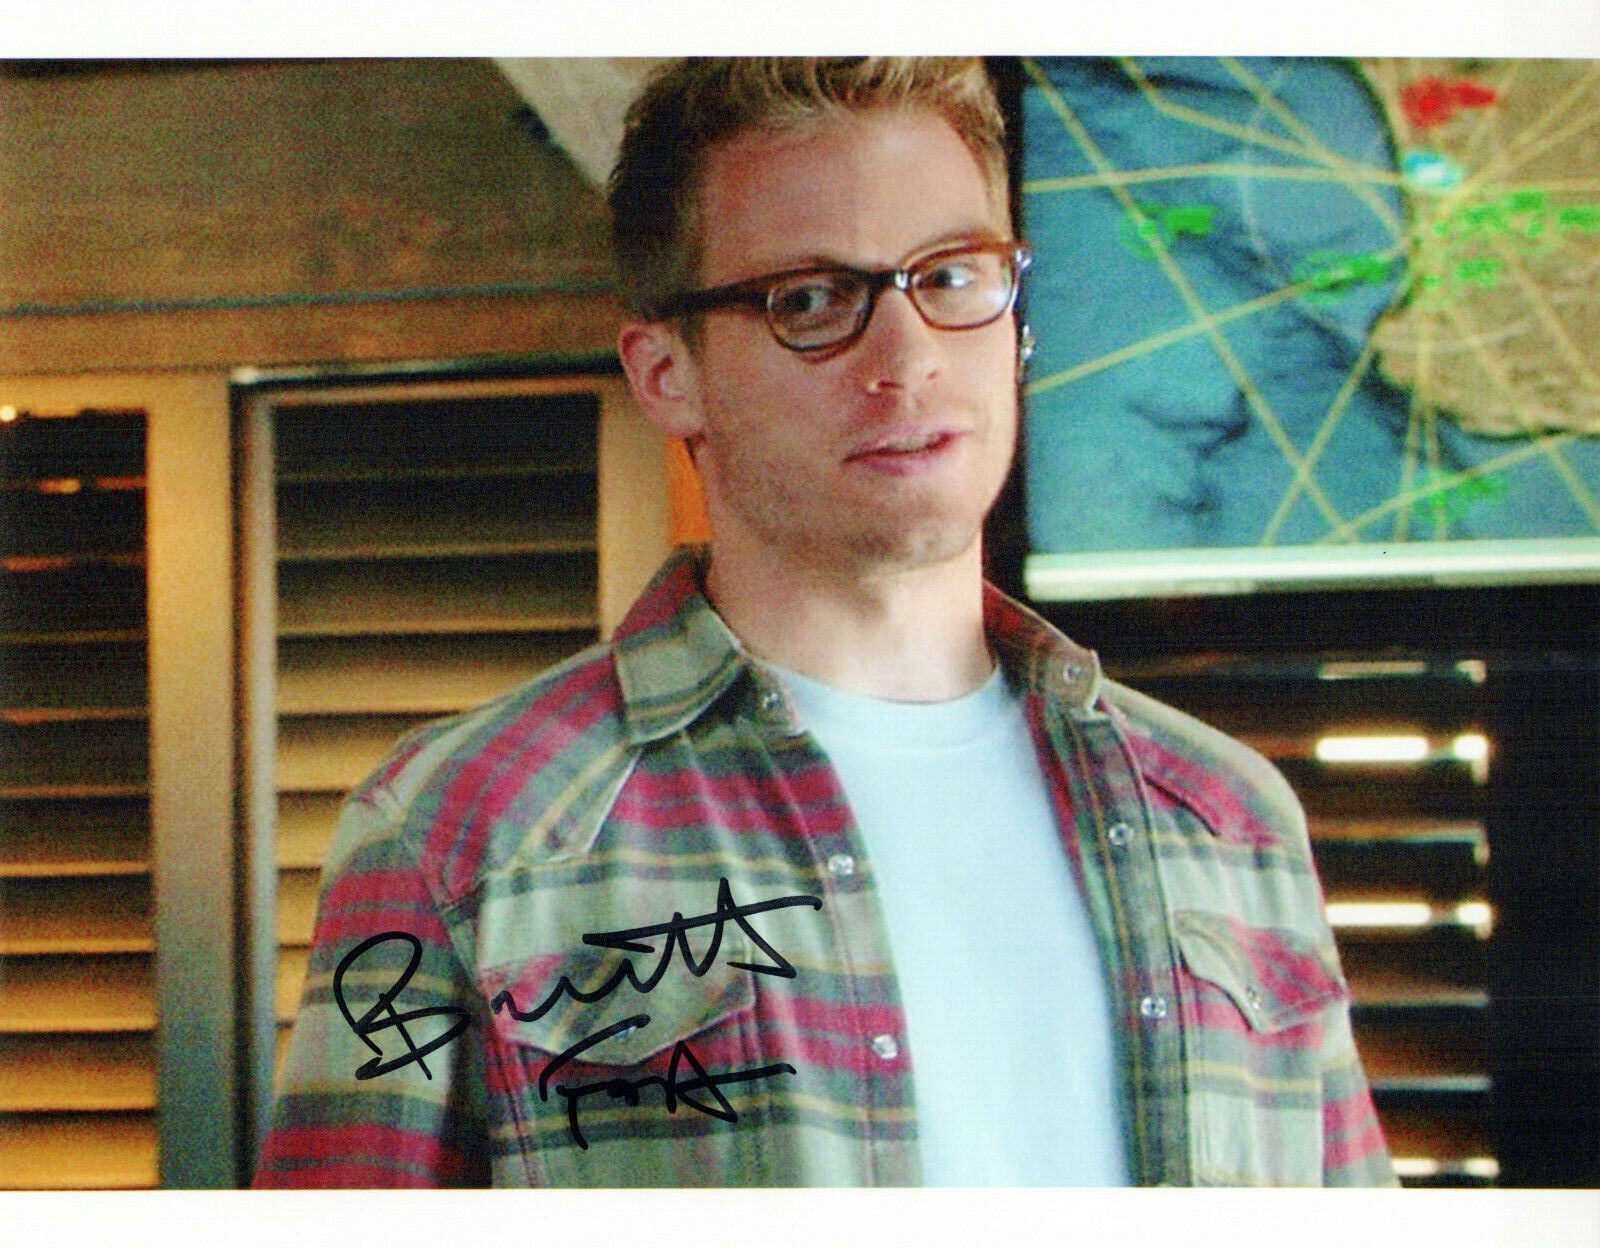 Barrett Foa NCIS Los Angeles autographed Photo Poster painting signed 8x10 #10 Eric Beale